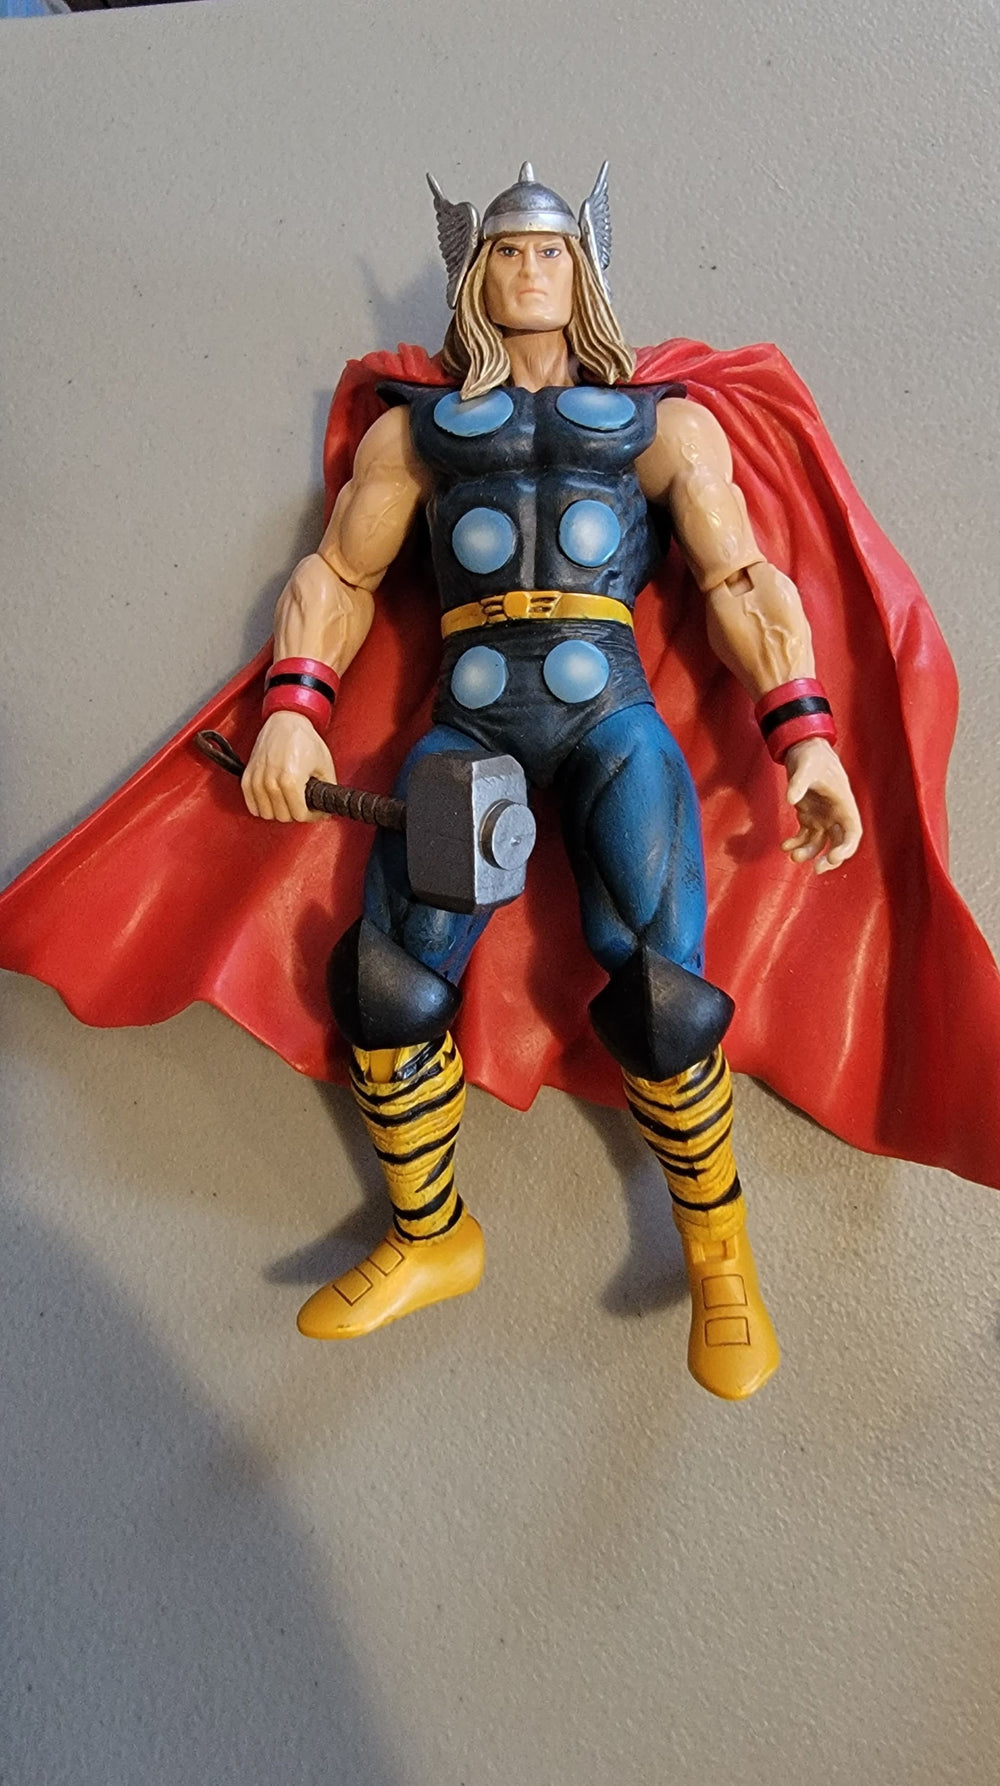 Marvel Legends THOR (LOOSE - As Shown)